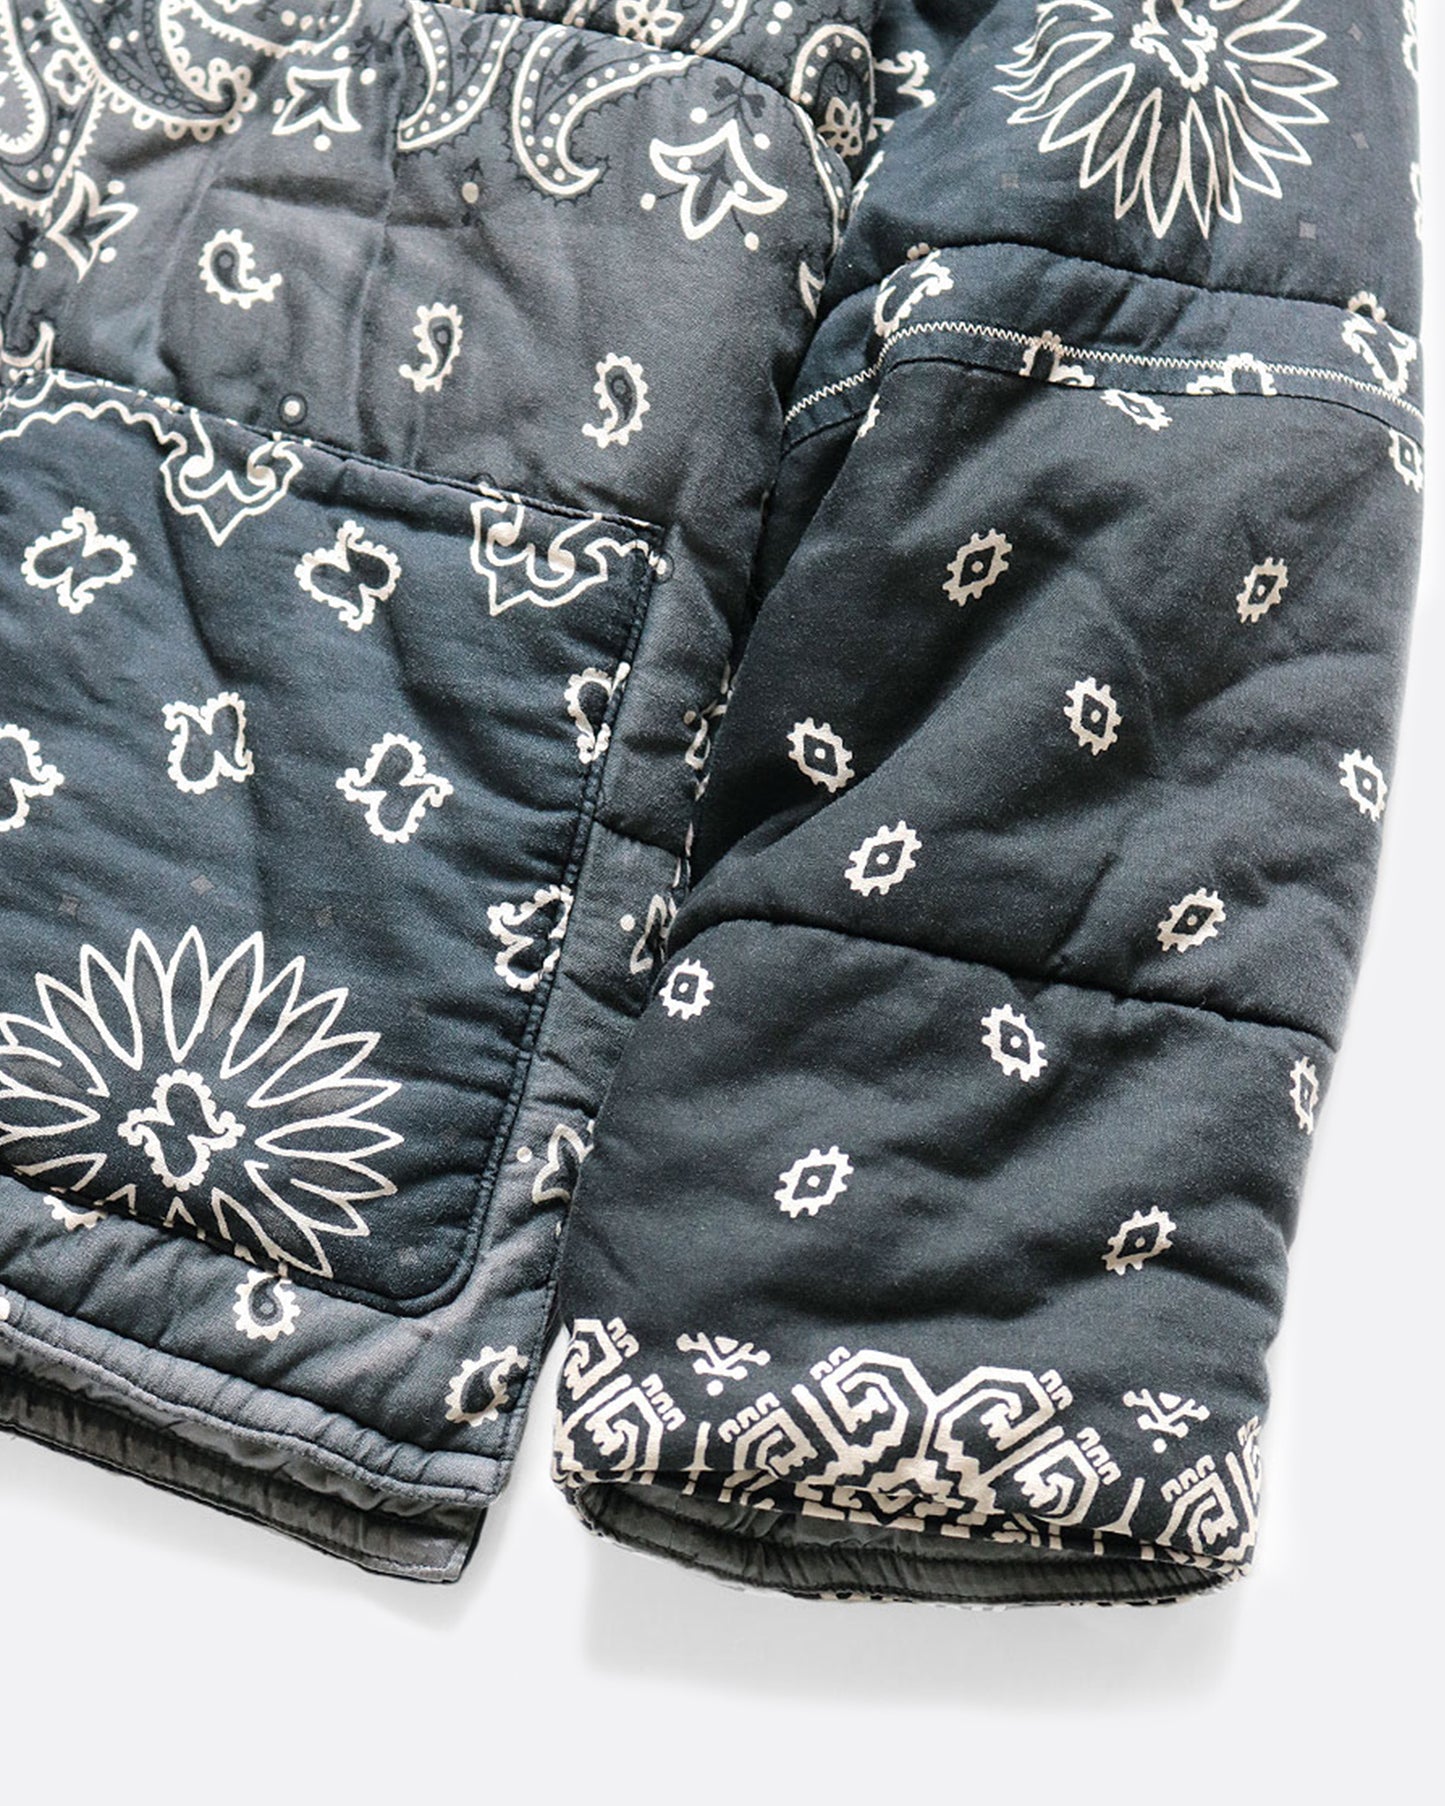 A close up of the sleeve on the black quilted patchwork bandana jacket.